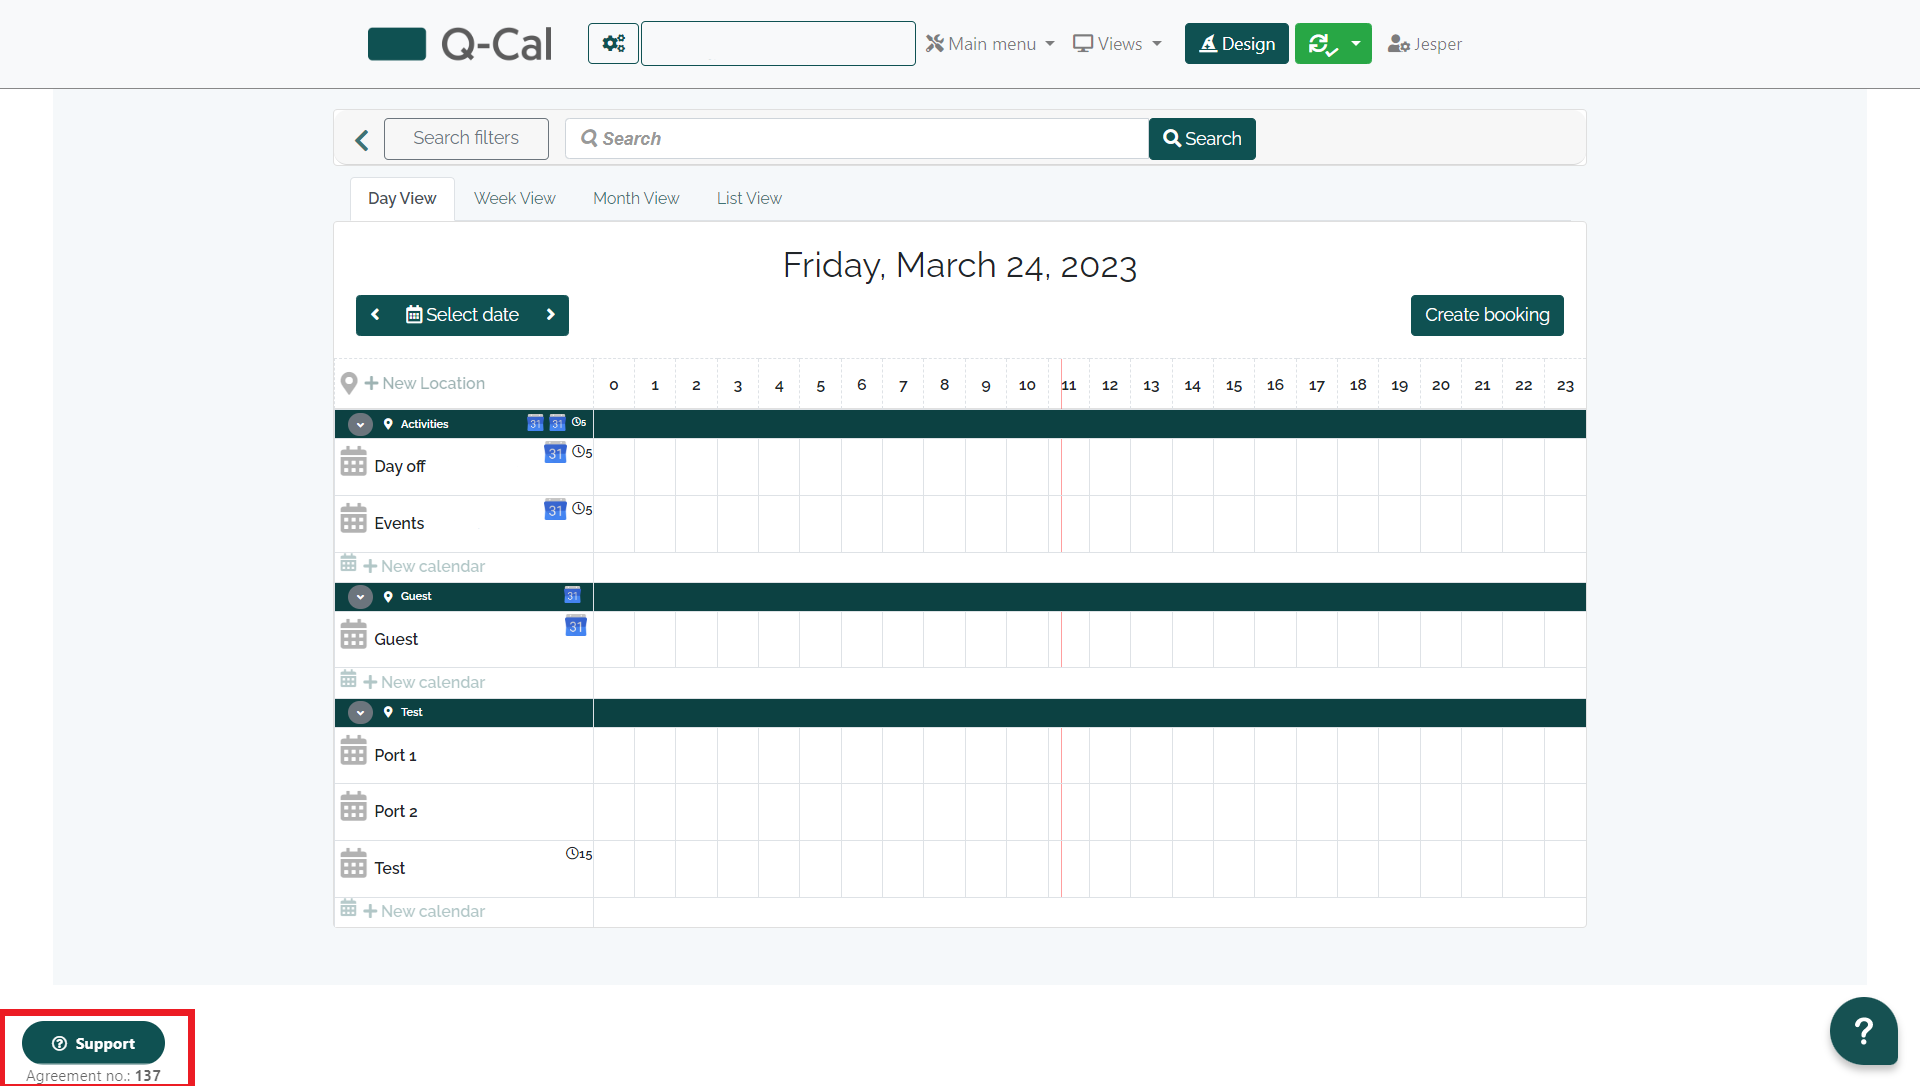 Q-Cal scheduling interface with a day view calendar for Friday, March 24, 2023, showing time slots for activities, events, and guest bookings.